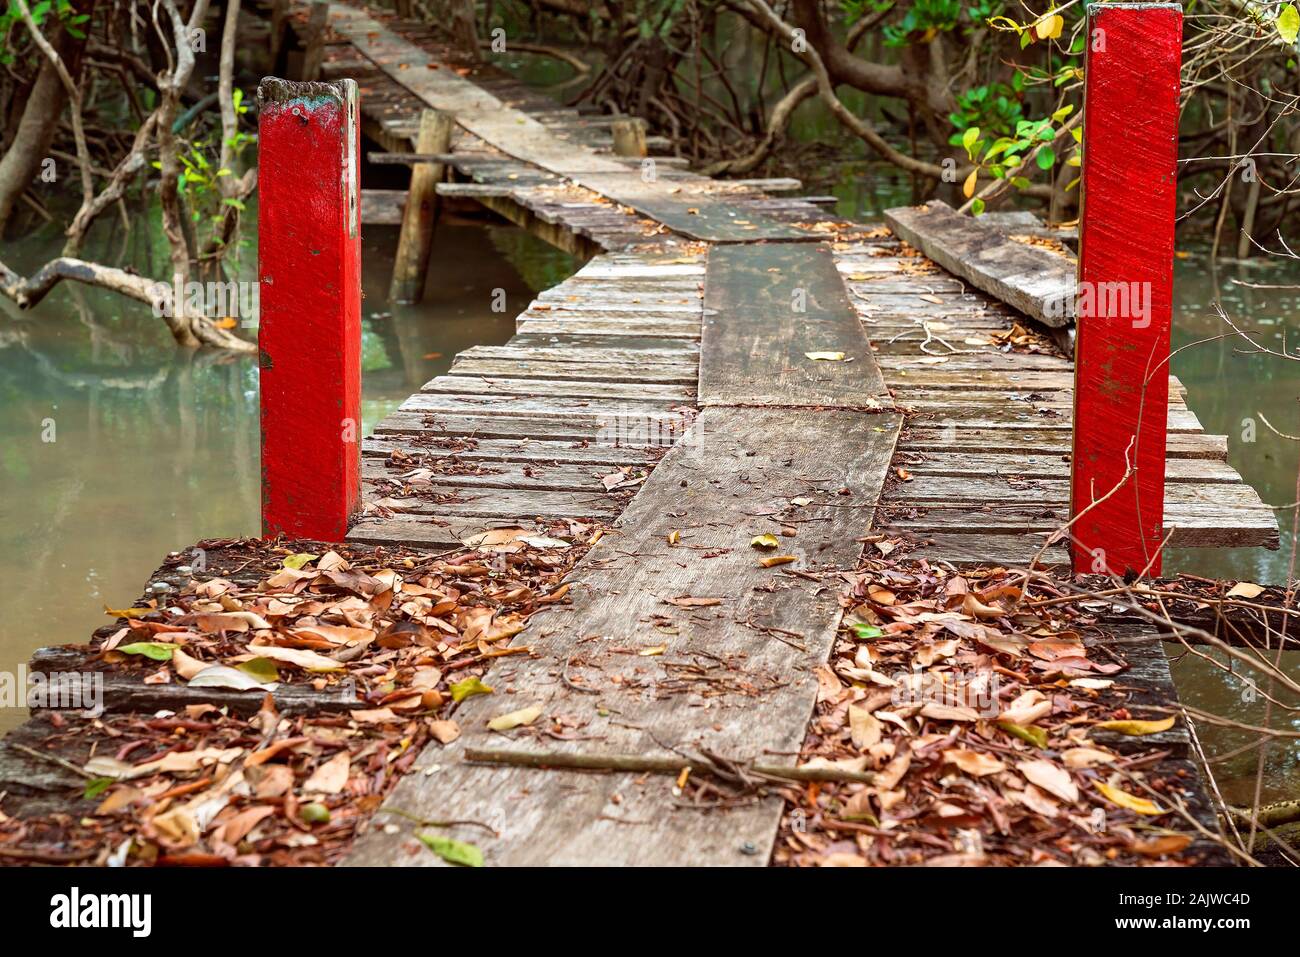 An old wooden bridge with uneven slats and red entry posts standing in the bush over a creek at high tide Stock Photo